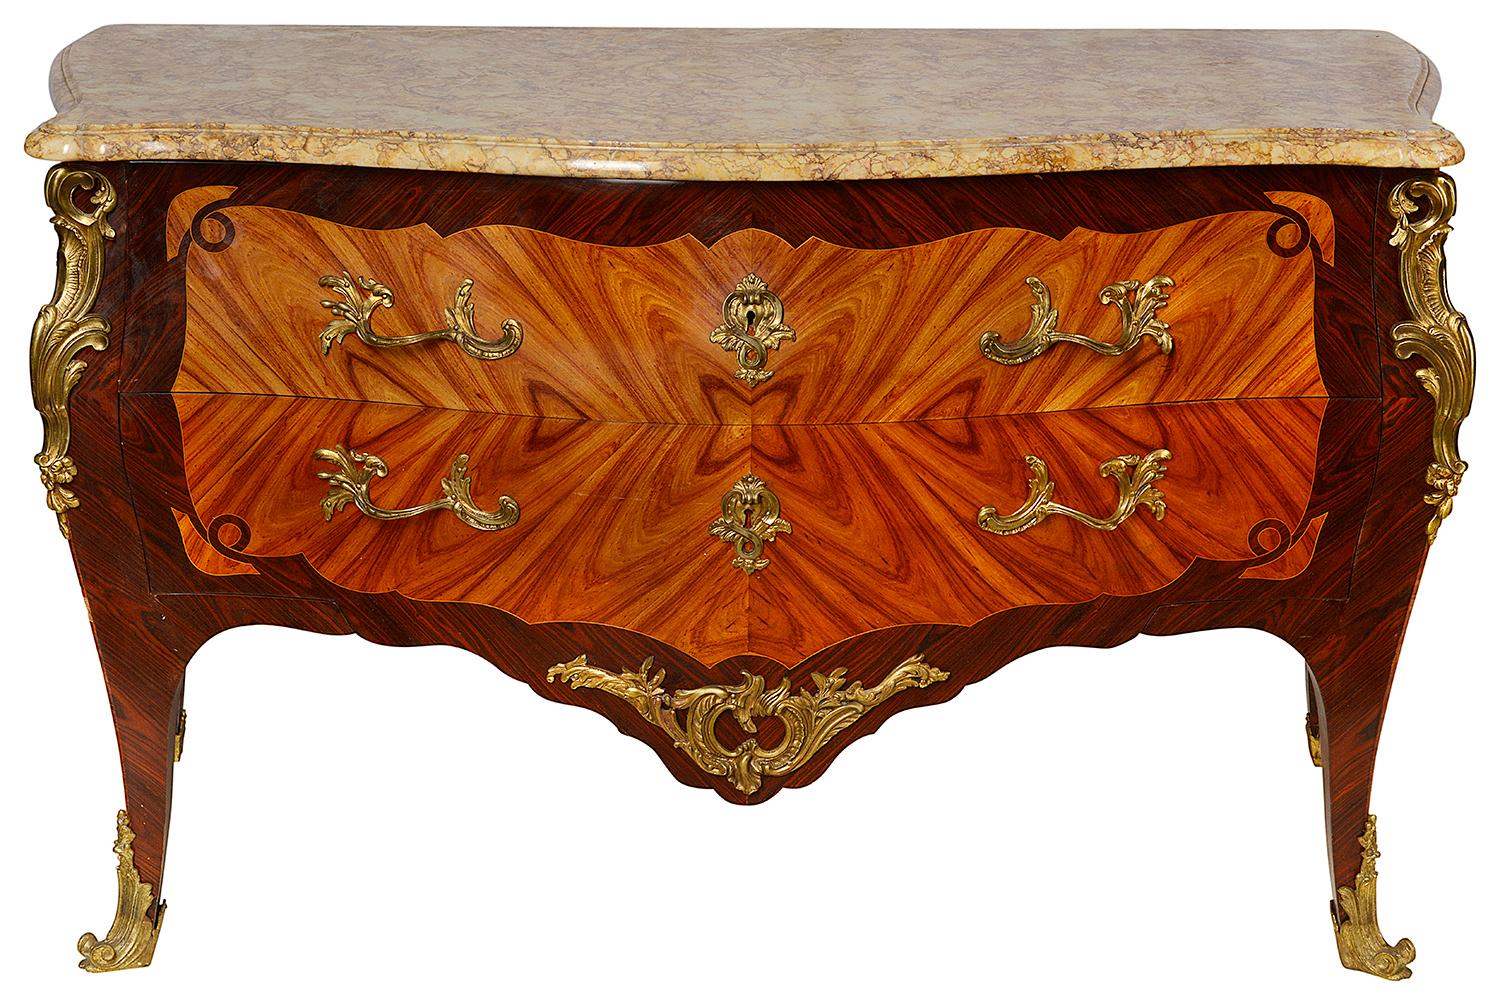 A good quality late 19th century French Louis XVI style Bombe fronted two-drawer commode, having its original marble top, gilded ormolu Rococo influenced mounts and handles, the drawer fronts and sides quarter veneered in tulip wood and raised on